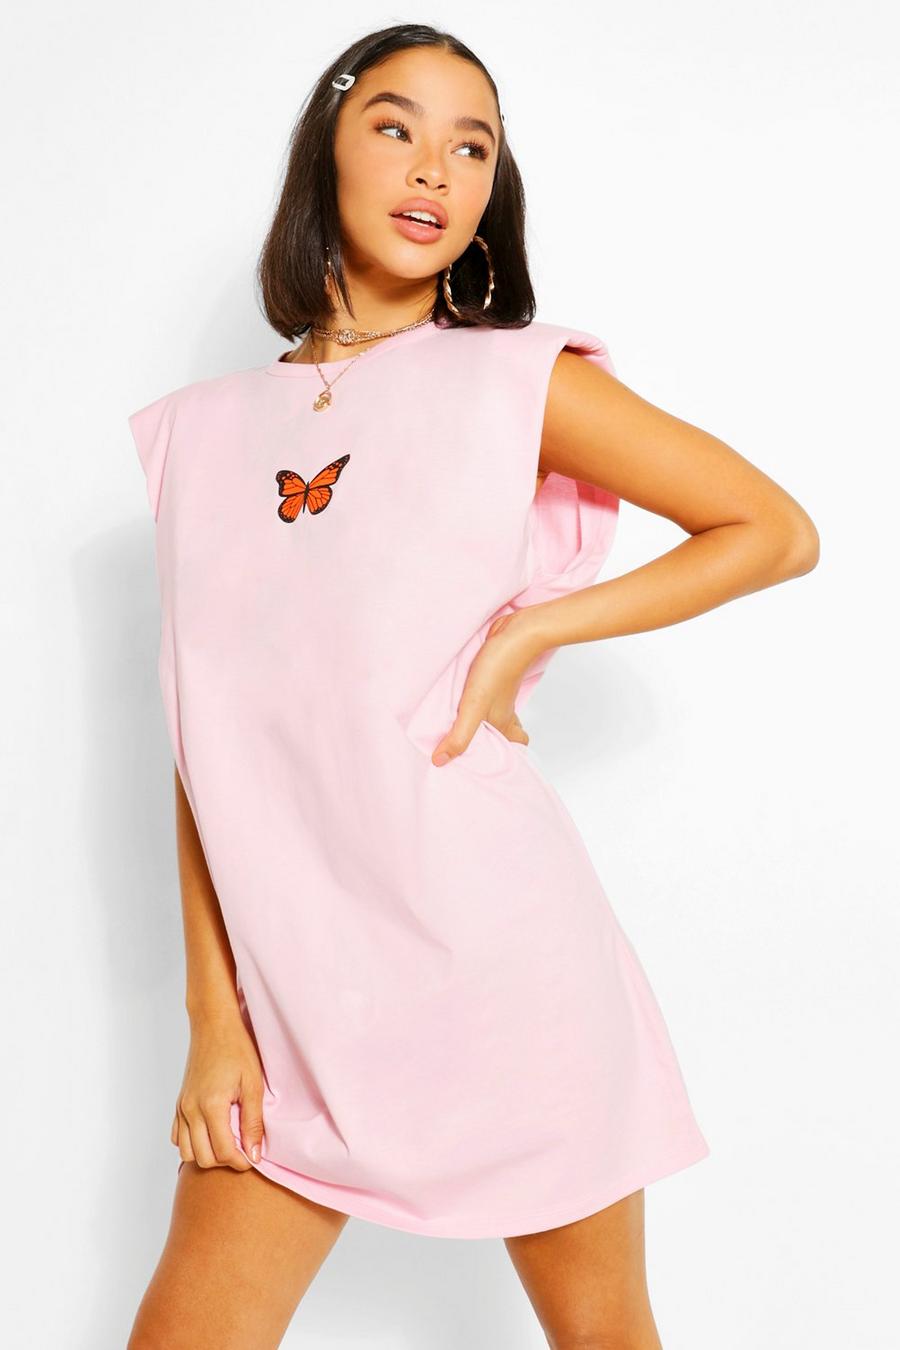 Butterfly Shoulder Pad Sleeveless TShirt Dress image number 1